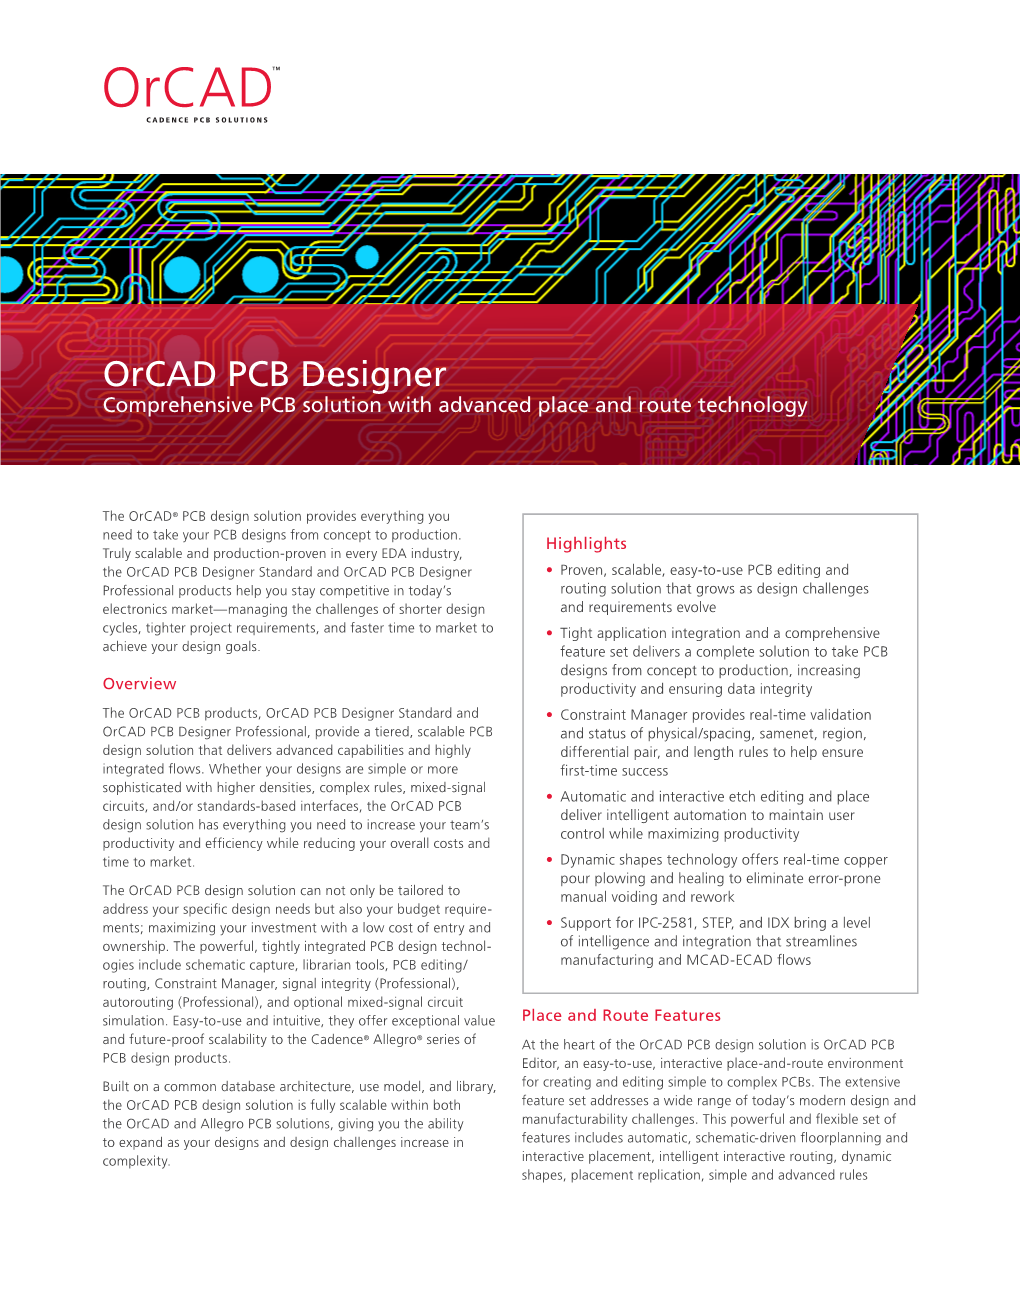 Orcad PCB Designer Comprehensive PCB Solution with Advanced Place and Route Technology